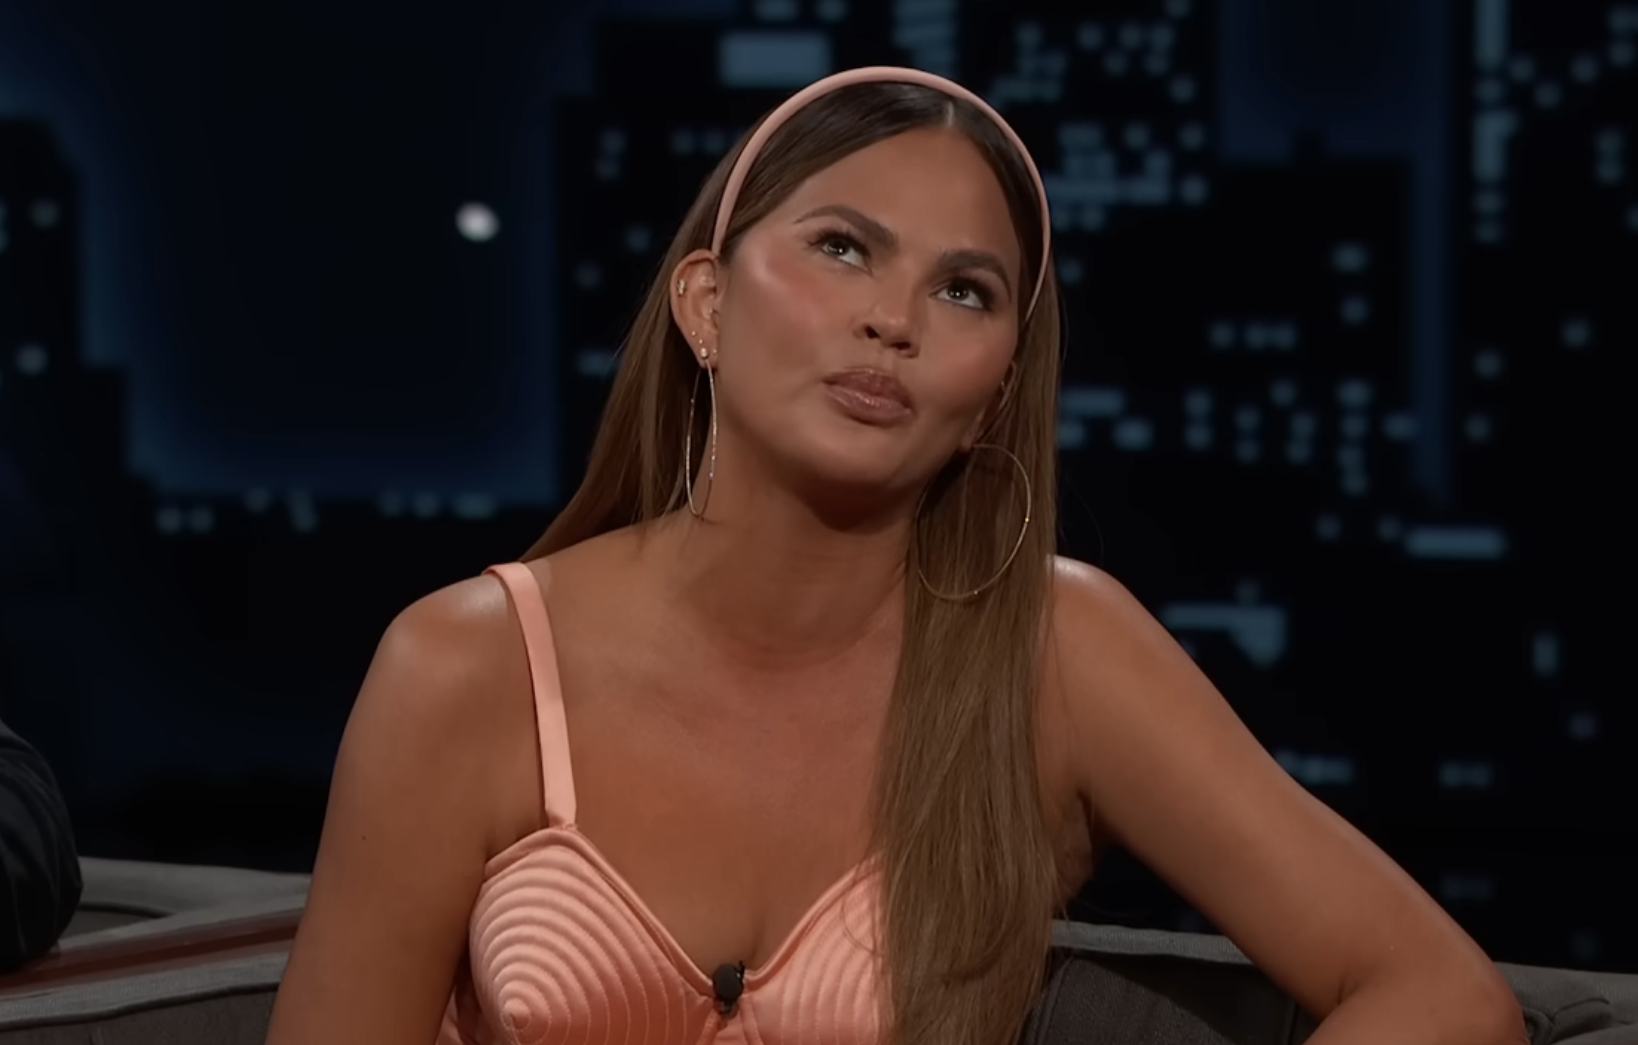 Chrissy sitting on the talk show wearing a spaghetti-strap outfit